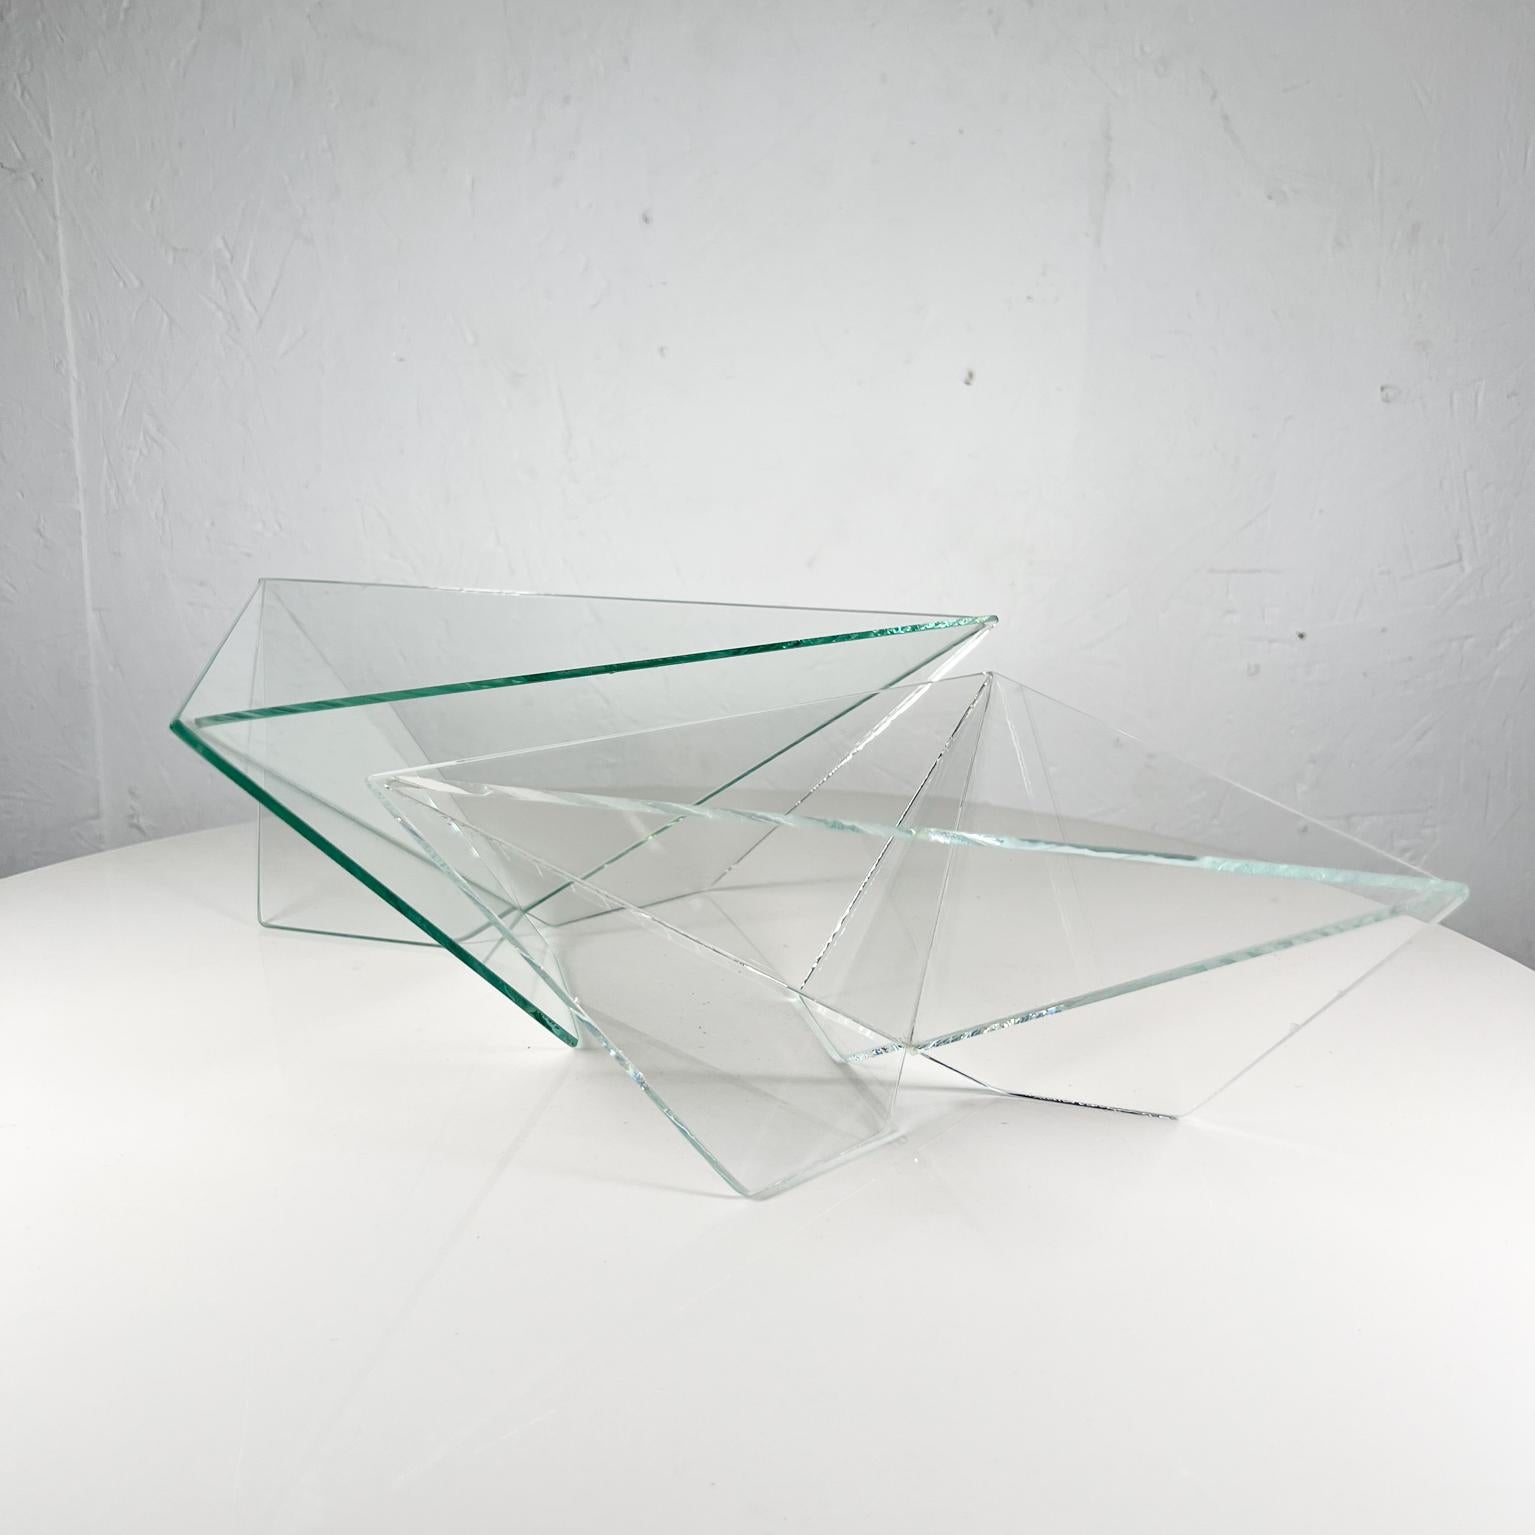 1988 Dramatically Sharp Modern glass art bowl John Seitz 
Pyramid Triangle Art Form
Measures: Large 4.38 tall x 11.78 each side Smaller 3.25 tall x 9.5 each side
Signed Seitz, 1988
Preowned Original vintage condition.
See all images provided.
 